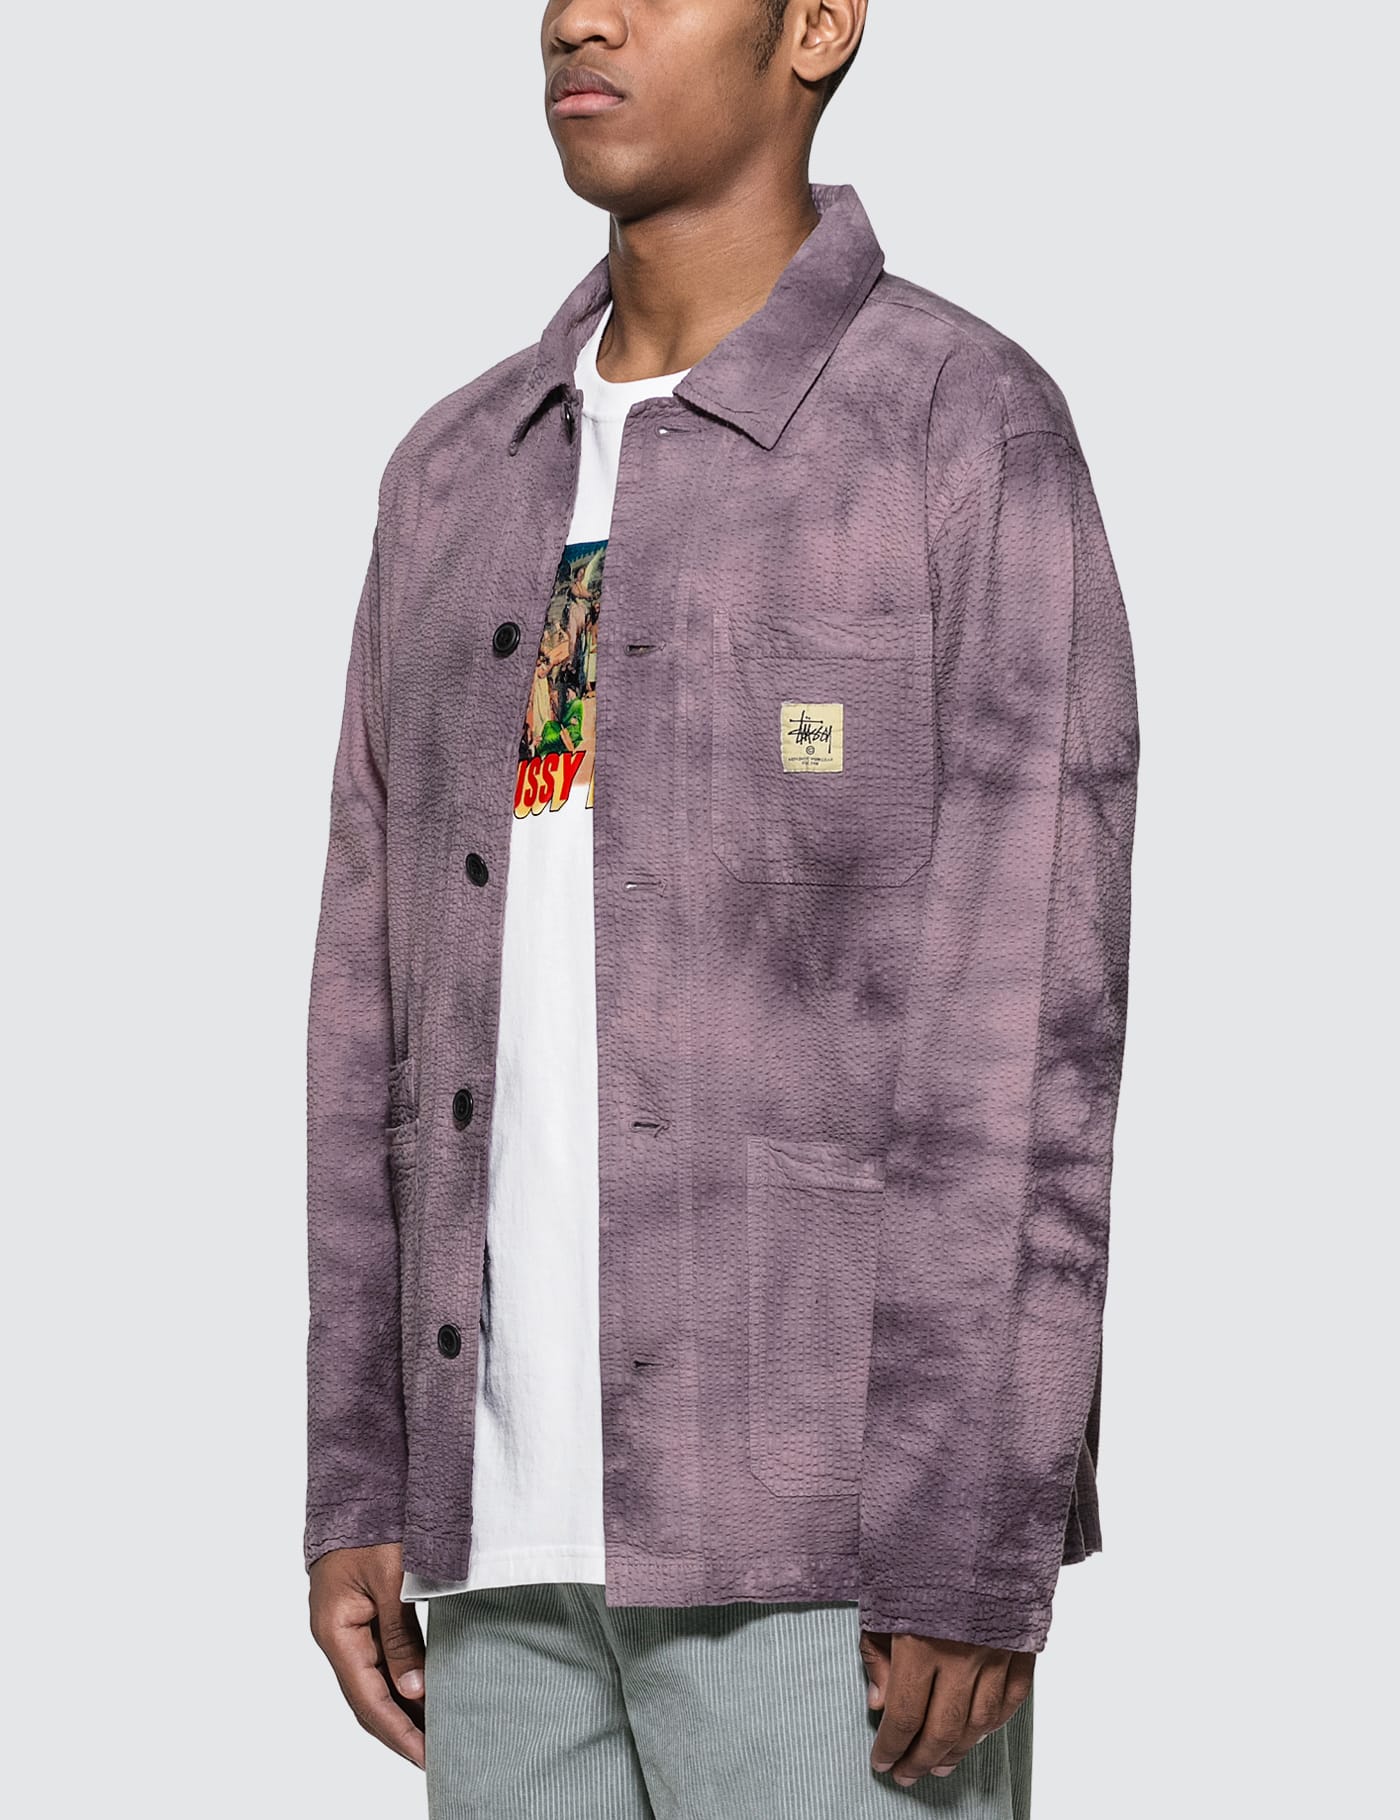 Stüssy - O'dyed Seersucker Chore Jacket | HBX - Globally Curated 